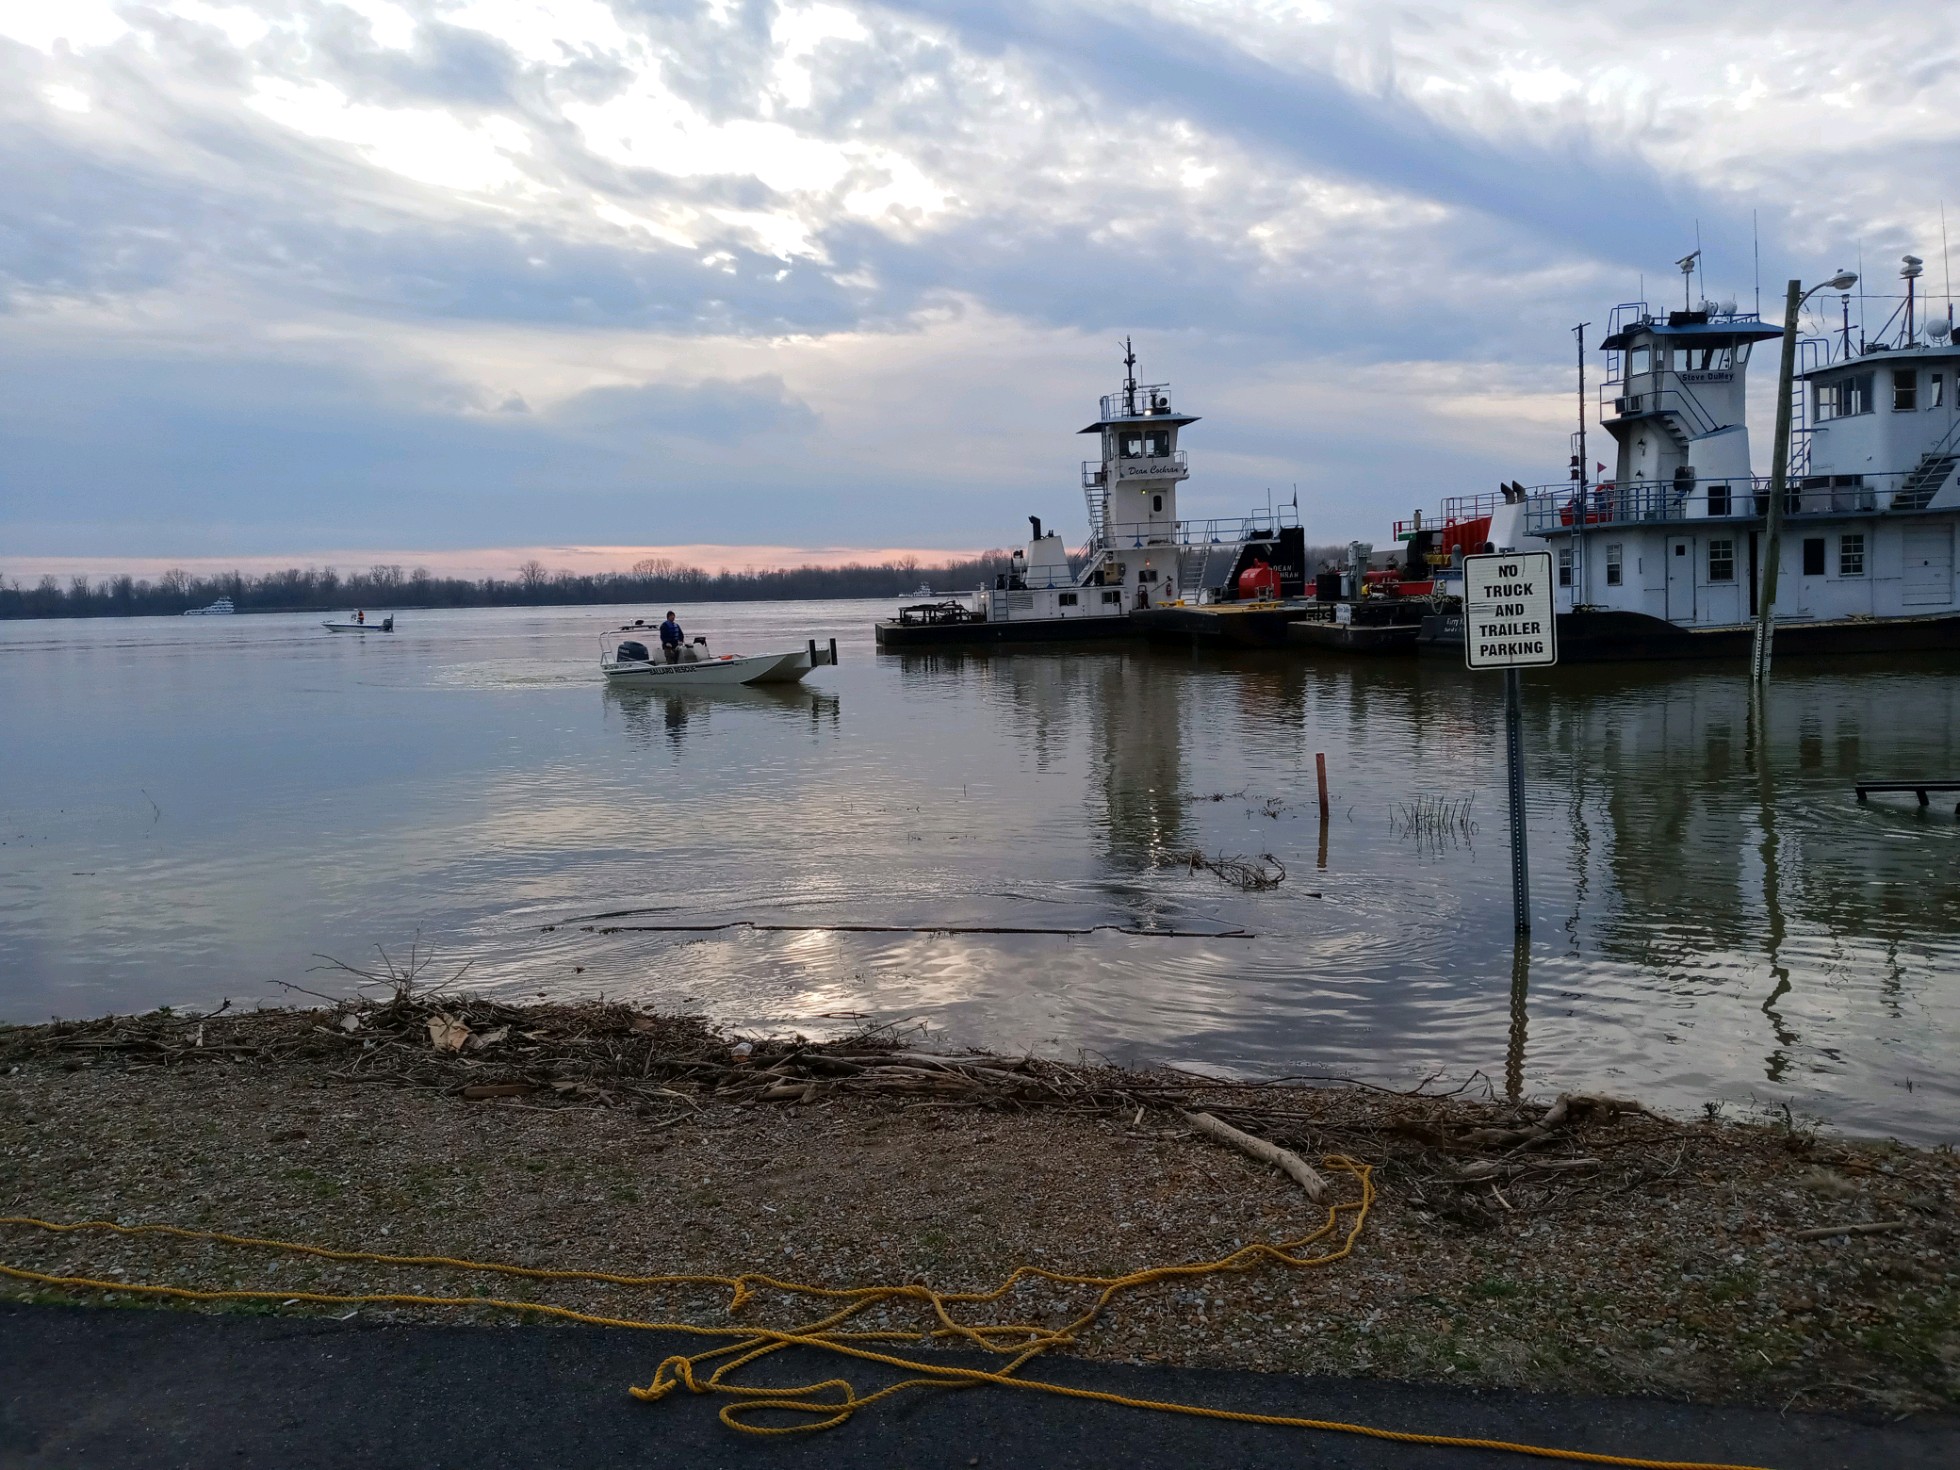 West Kentucky Regional Riverport Authority - Mississippi River Riverport located in Wickliffe KY